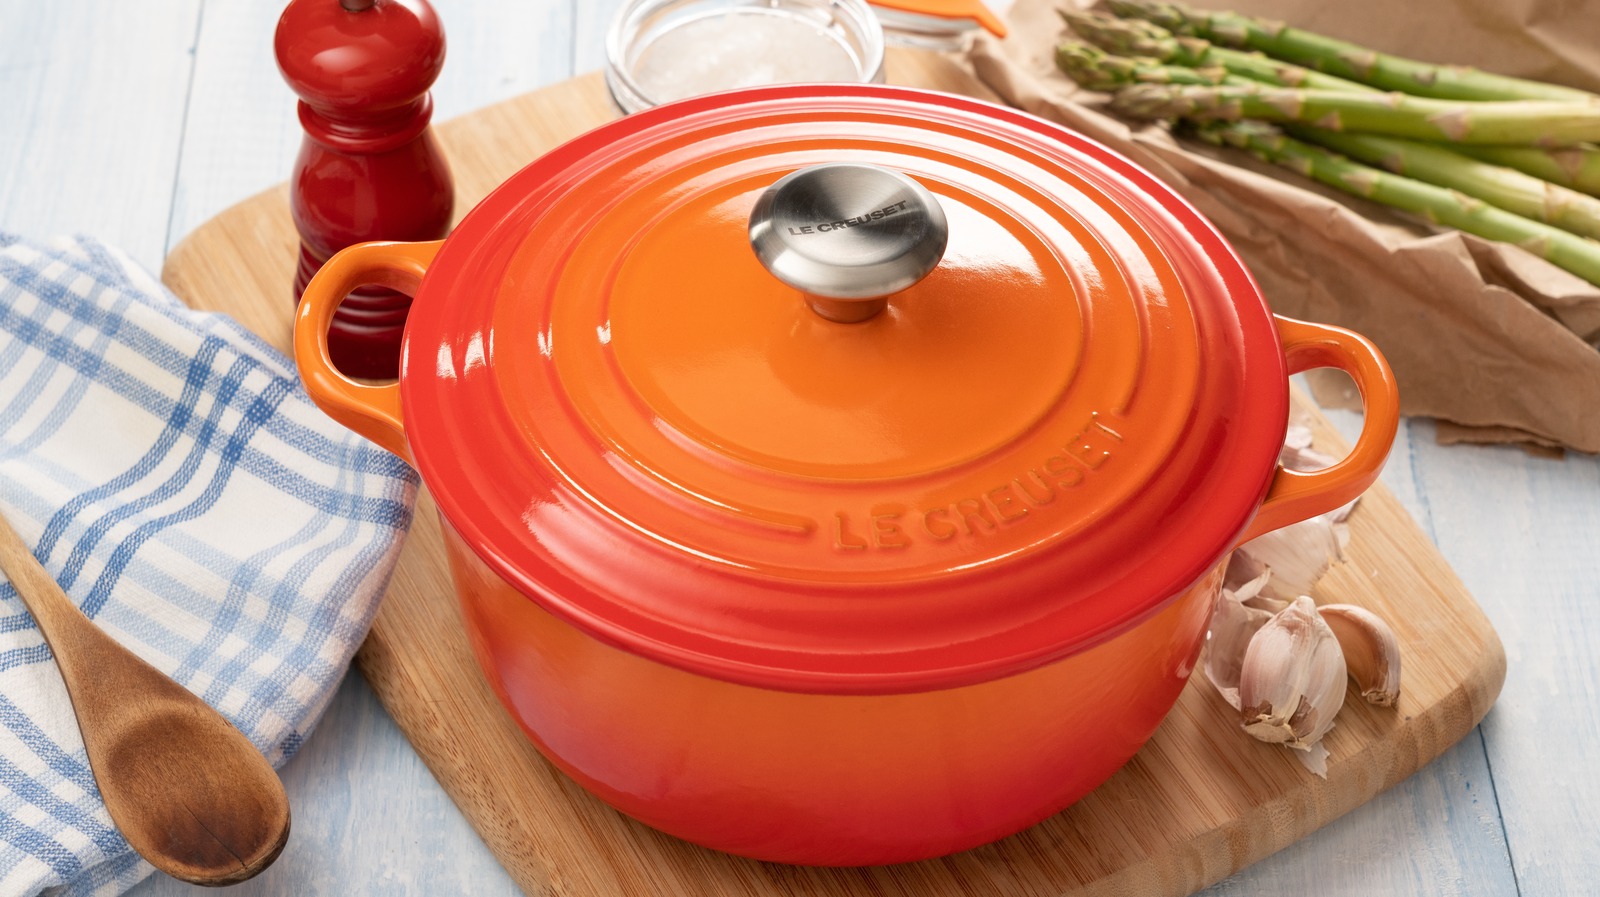 You May Want To Avoid Putting Your Dutch Oven In The Dishwasher